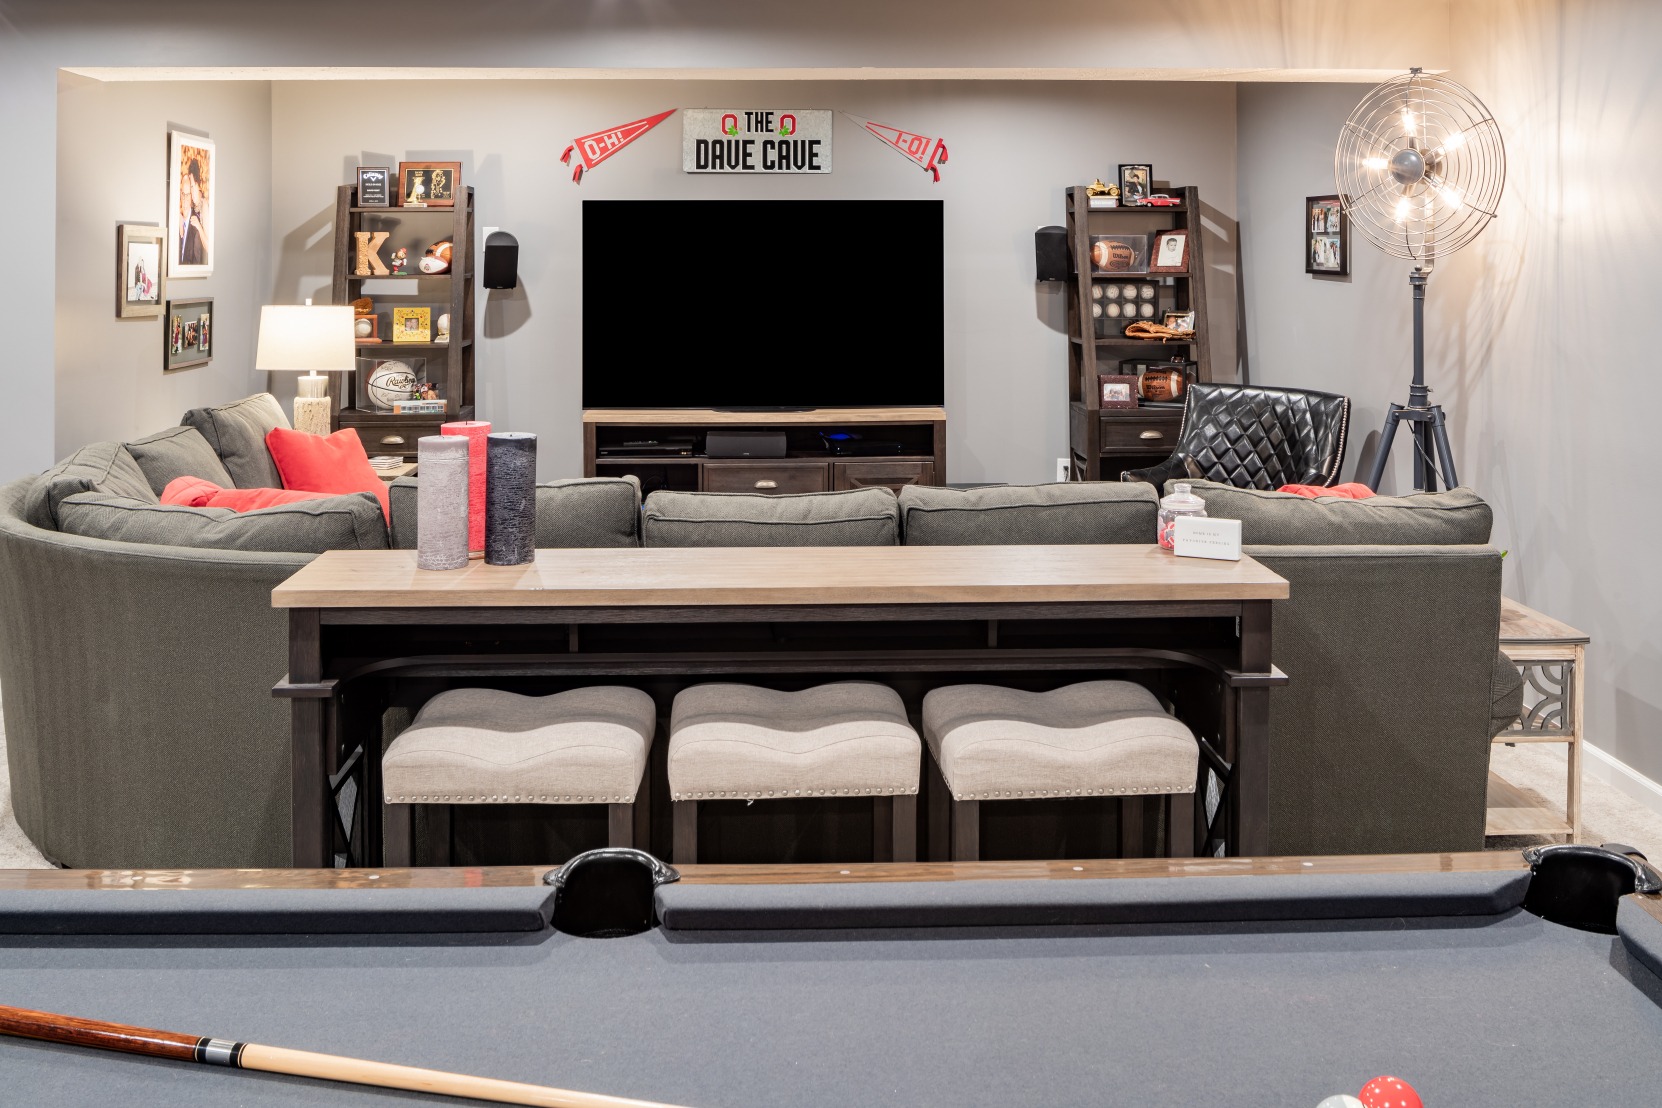 Basement TV Room - View from the Pool Table